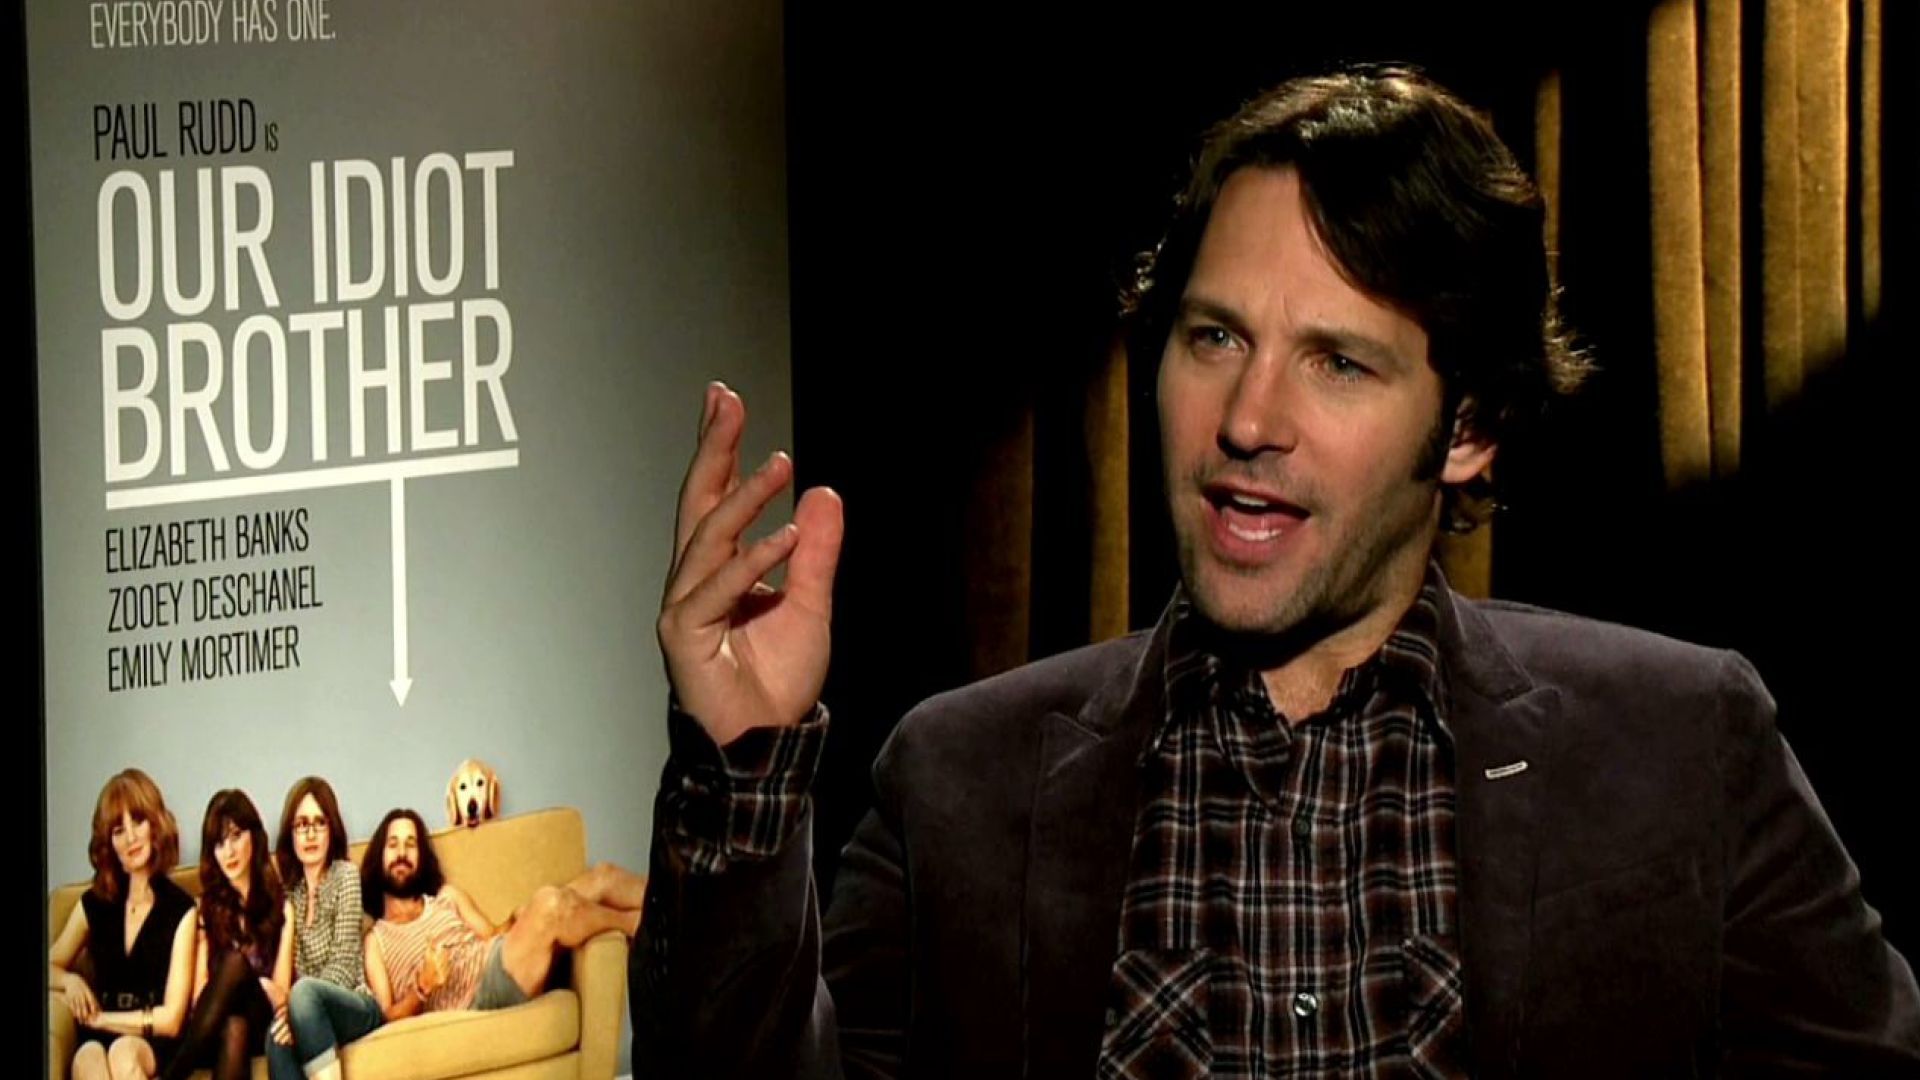 Paul Rudd on kissing his dog in Our Idiot Brother